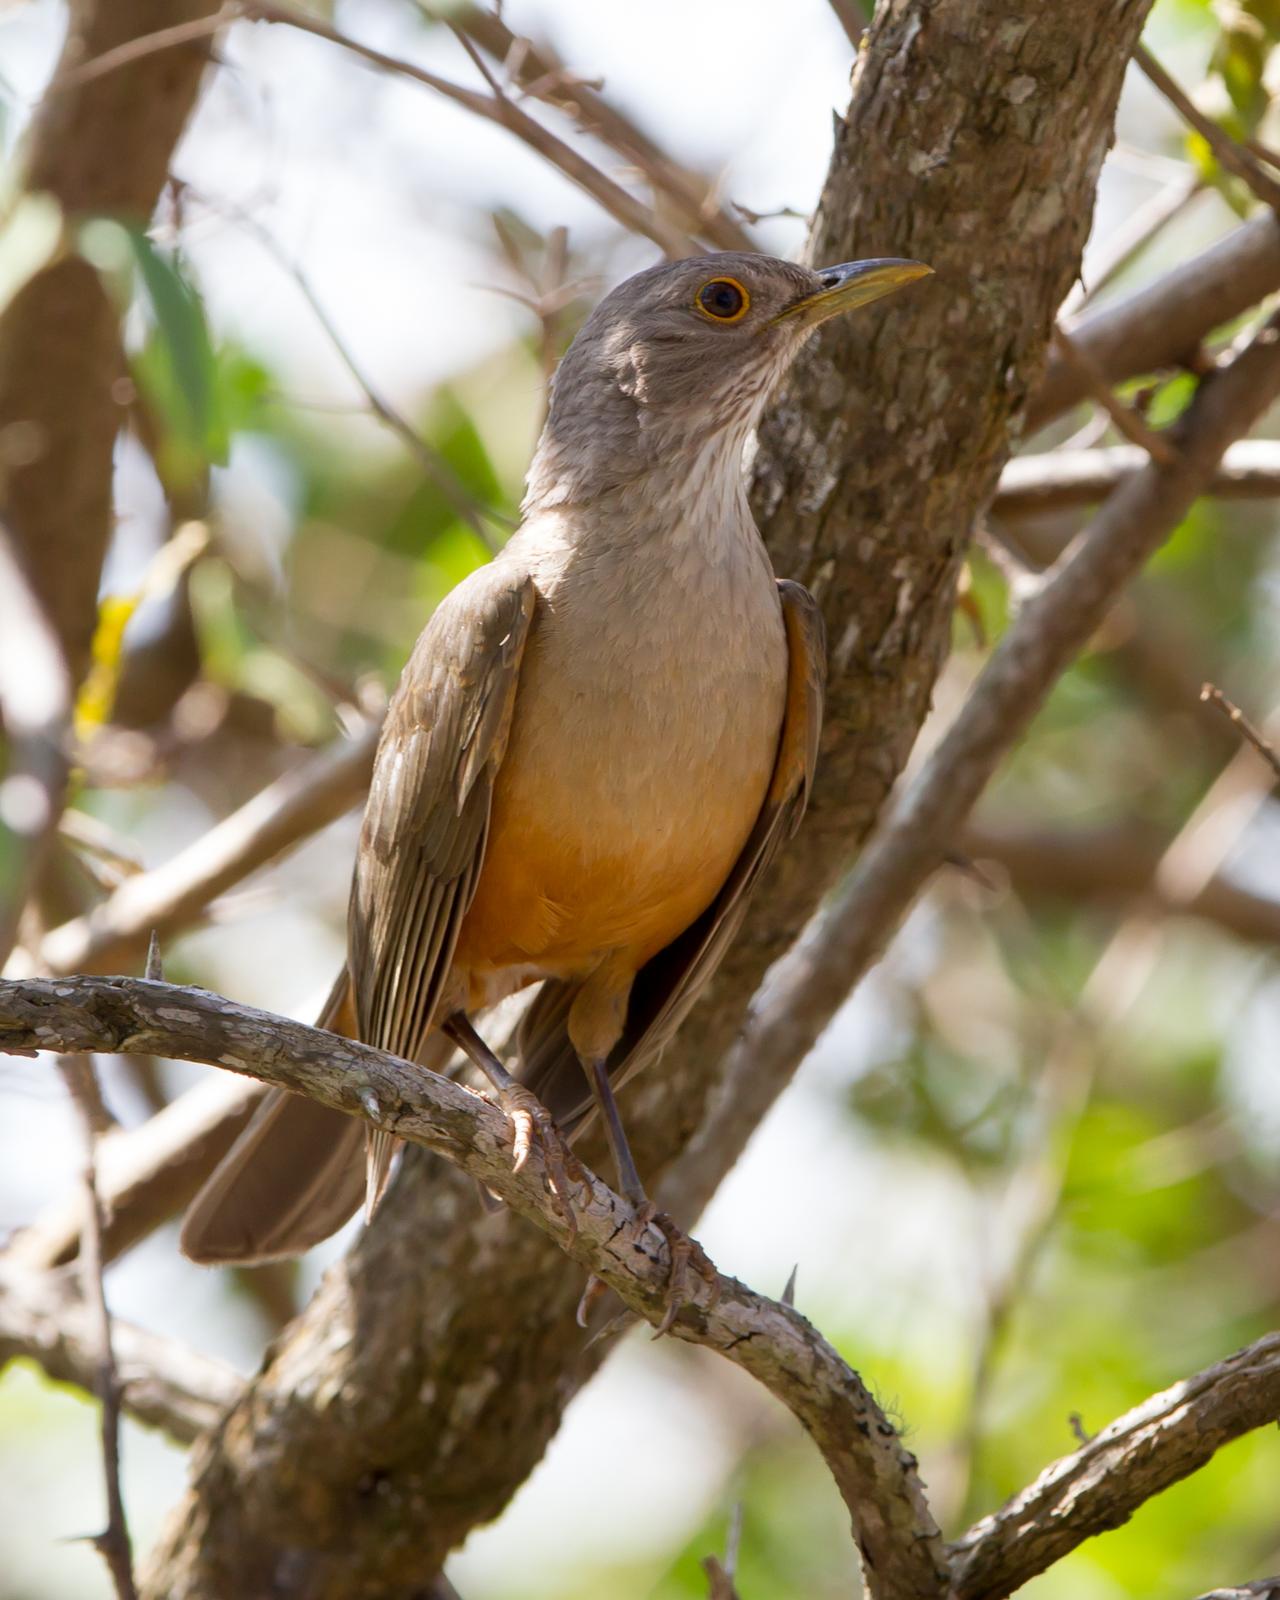 Rufous-bellied Thrush Photo by Kevin Berkoff